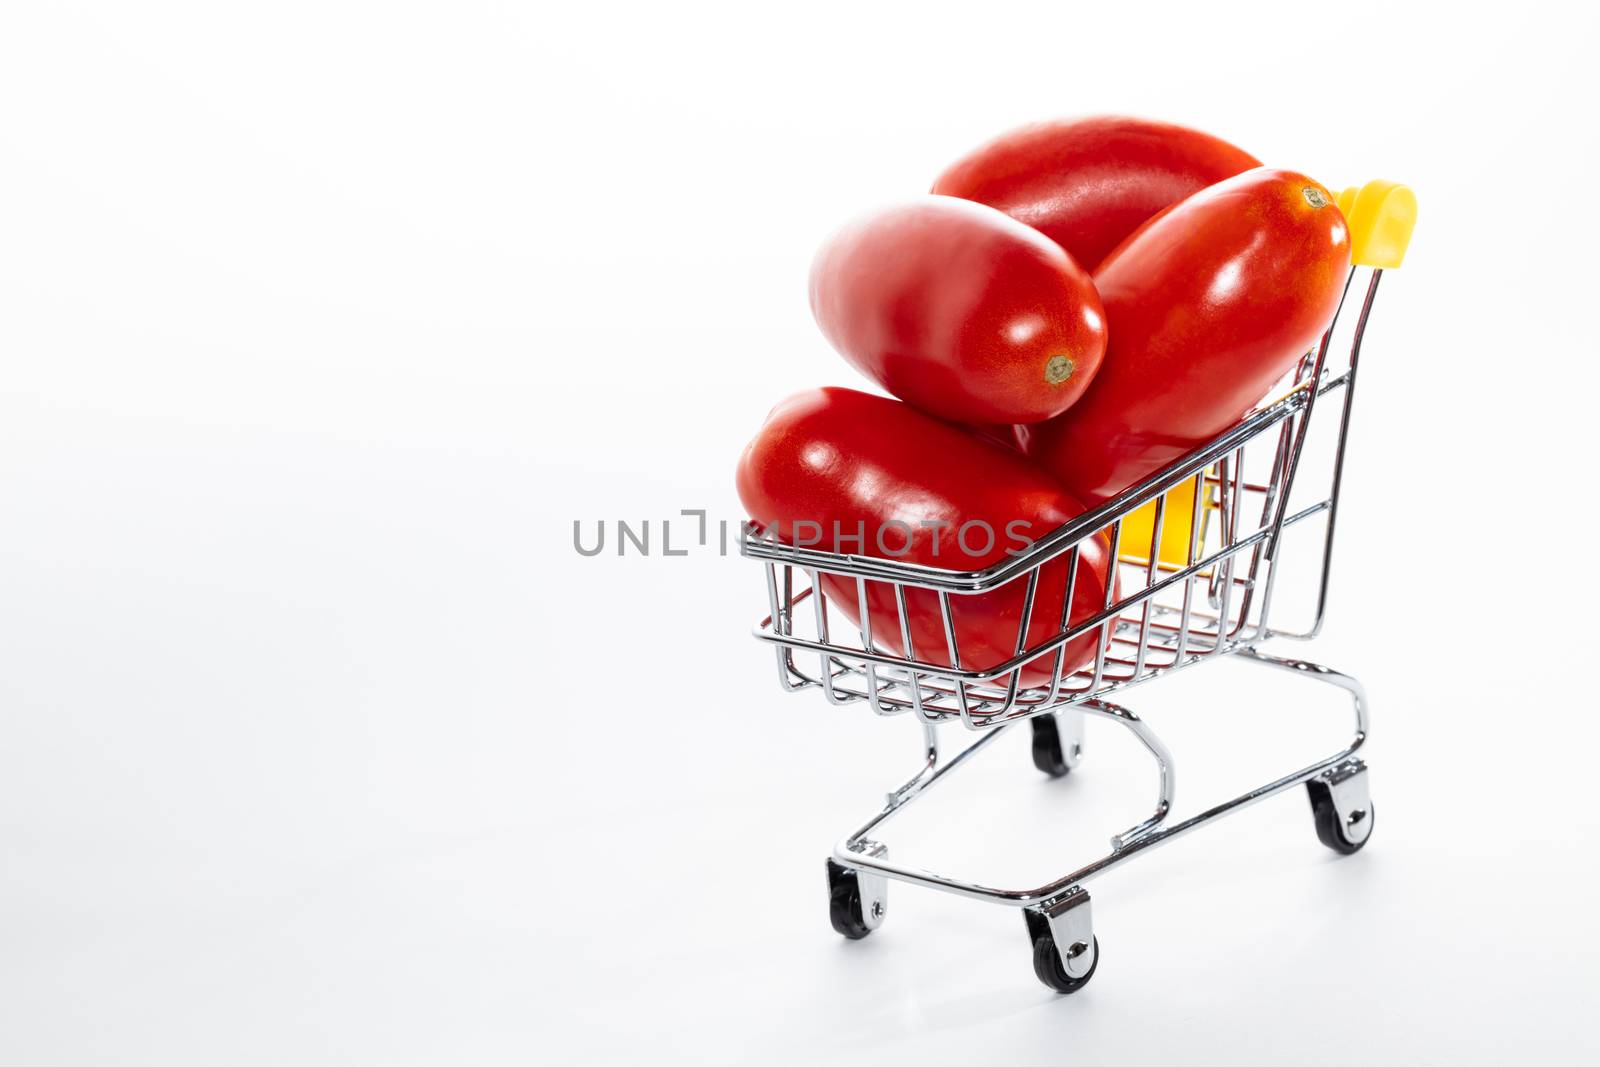 High angle shot of tomatoes in shopping cart isolated on white background. Ripe tasty red tomatos in shopping cart. Tomato trading concept. Online shopping concept. Copy space.